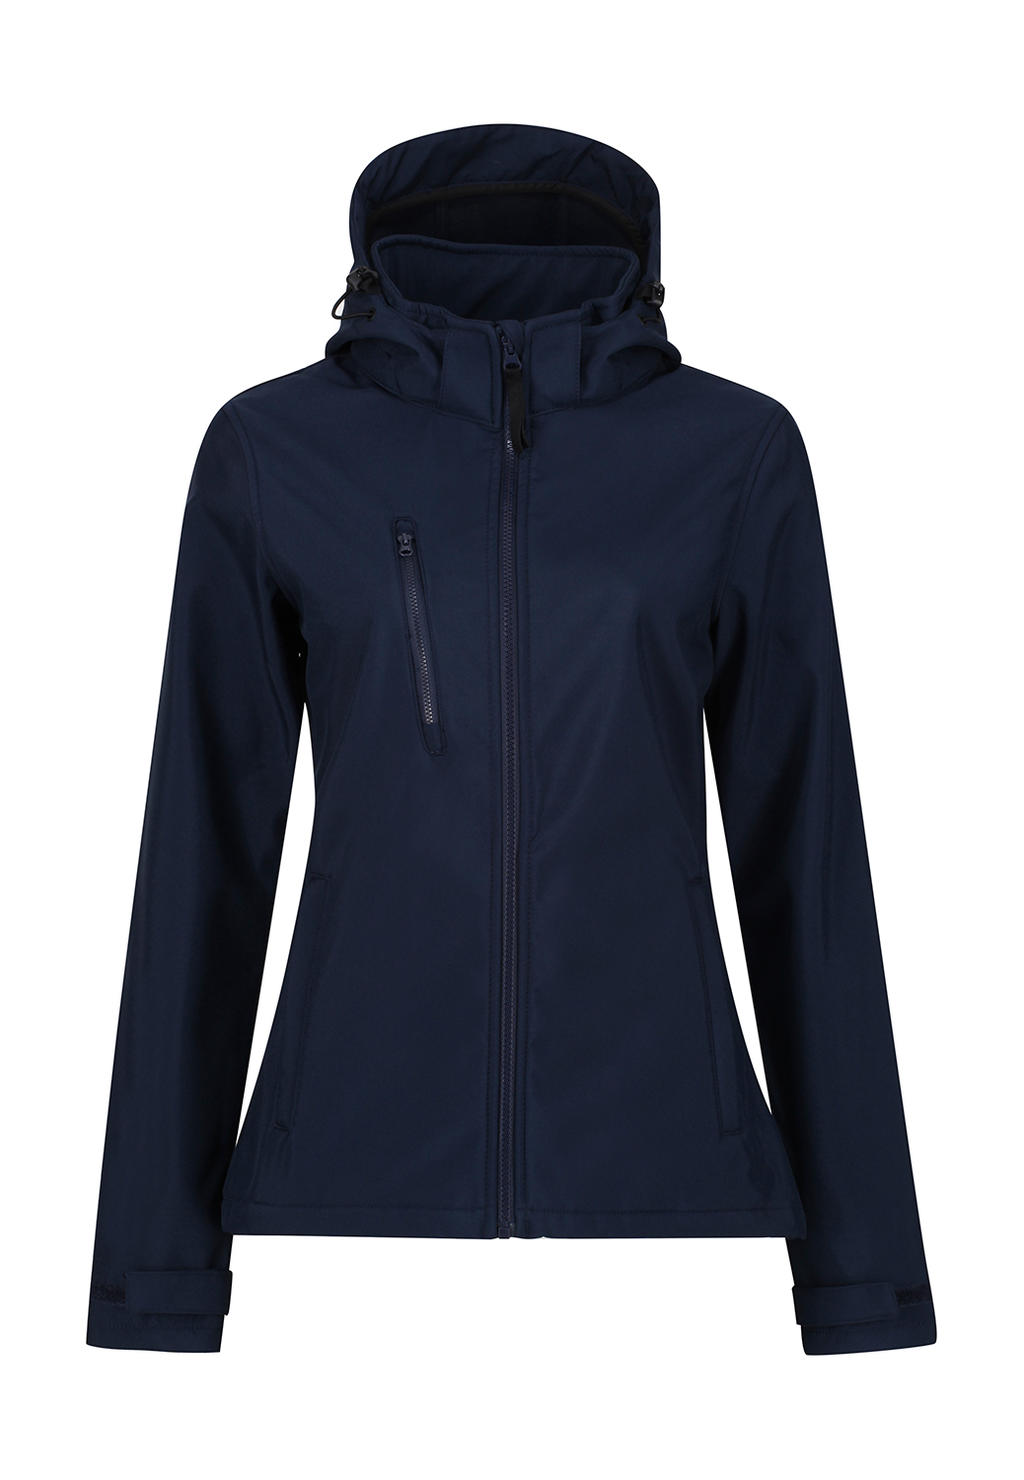  Womens Venturer 3-Layer Hooded Softshell Jacket in Farbe Navy